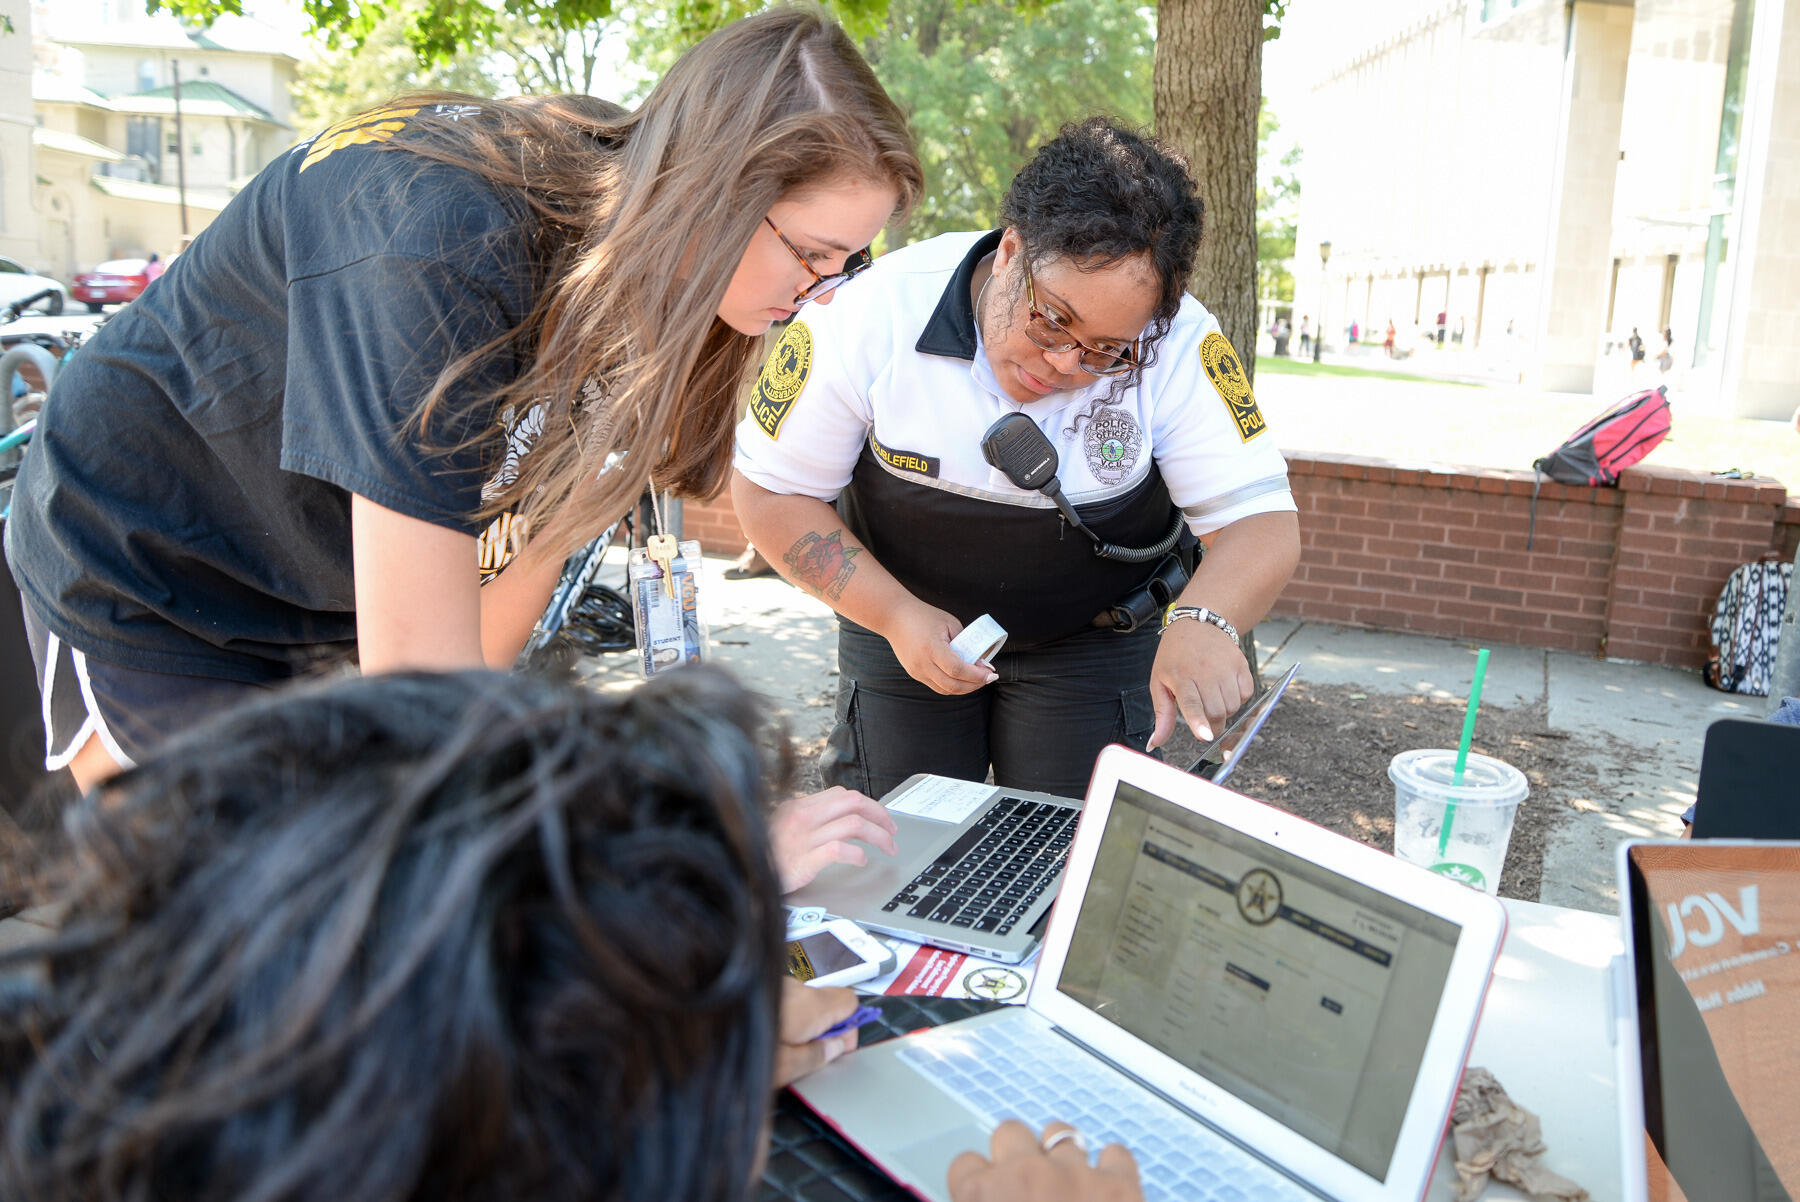 VCU Police officers help students register computers.